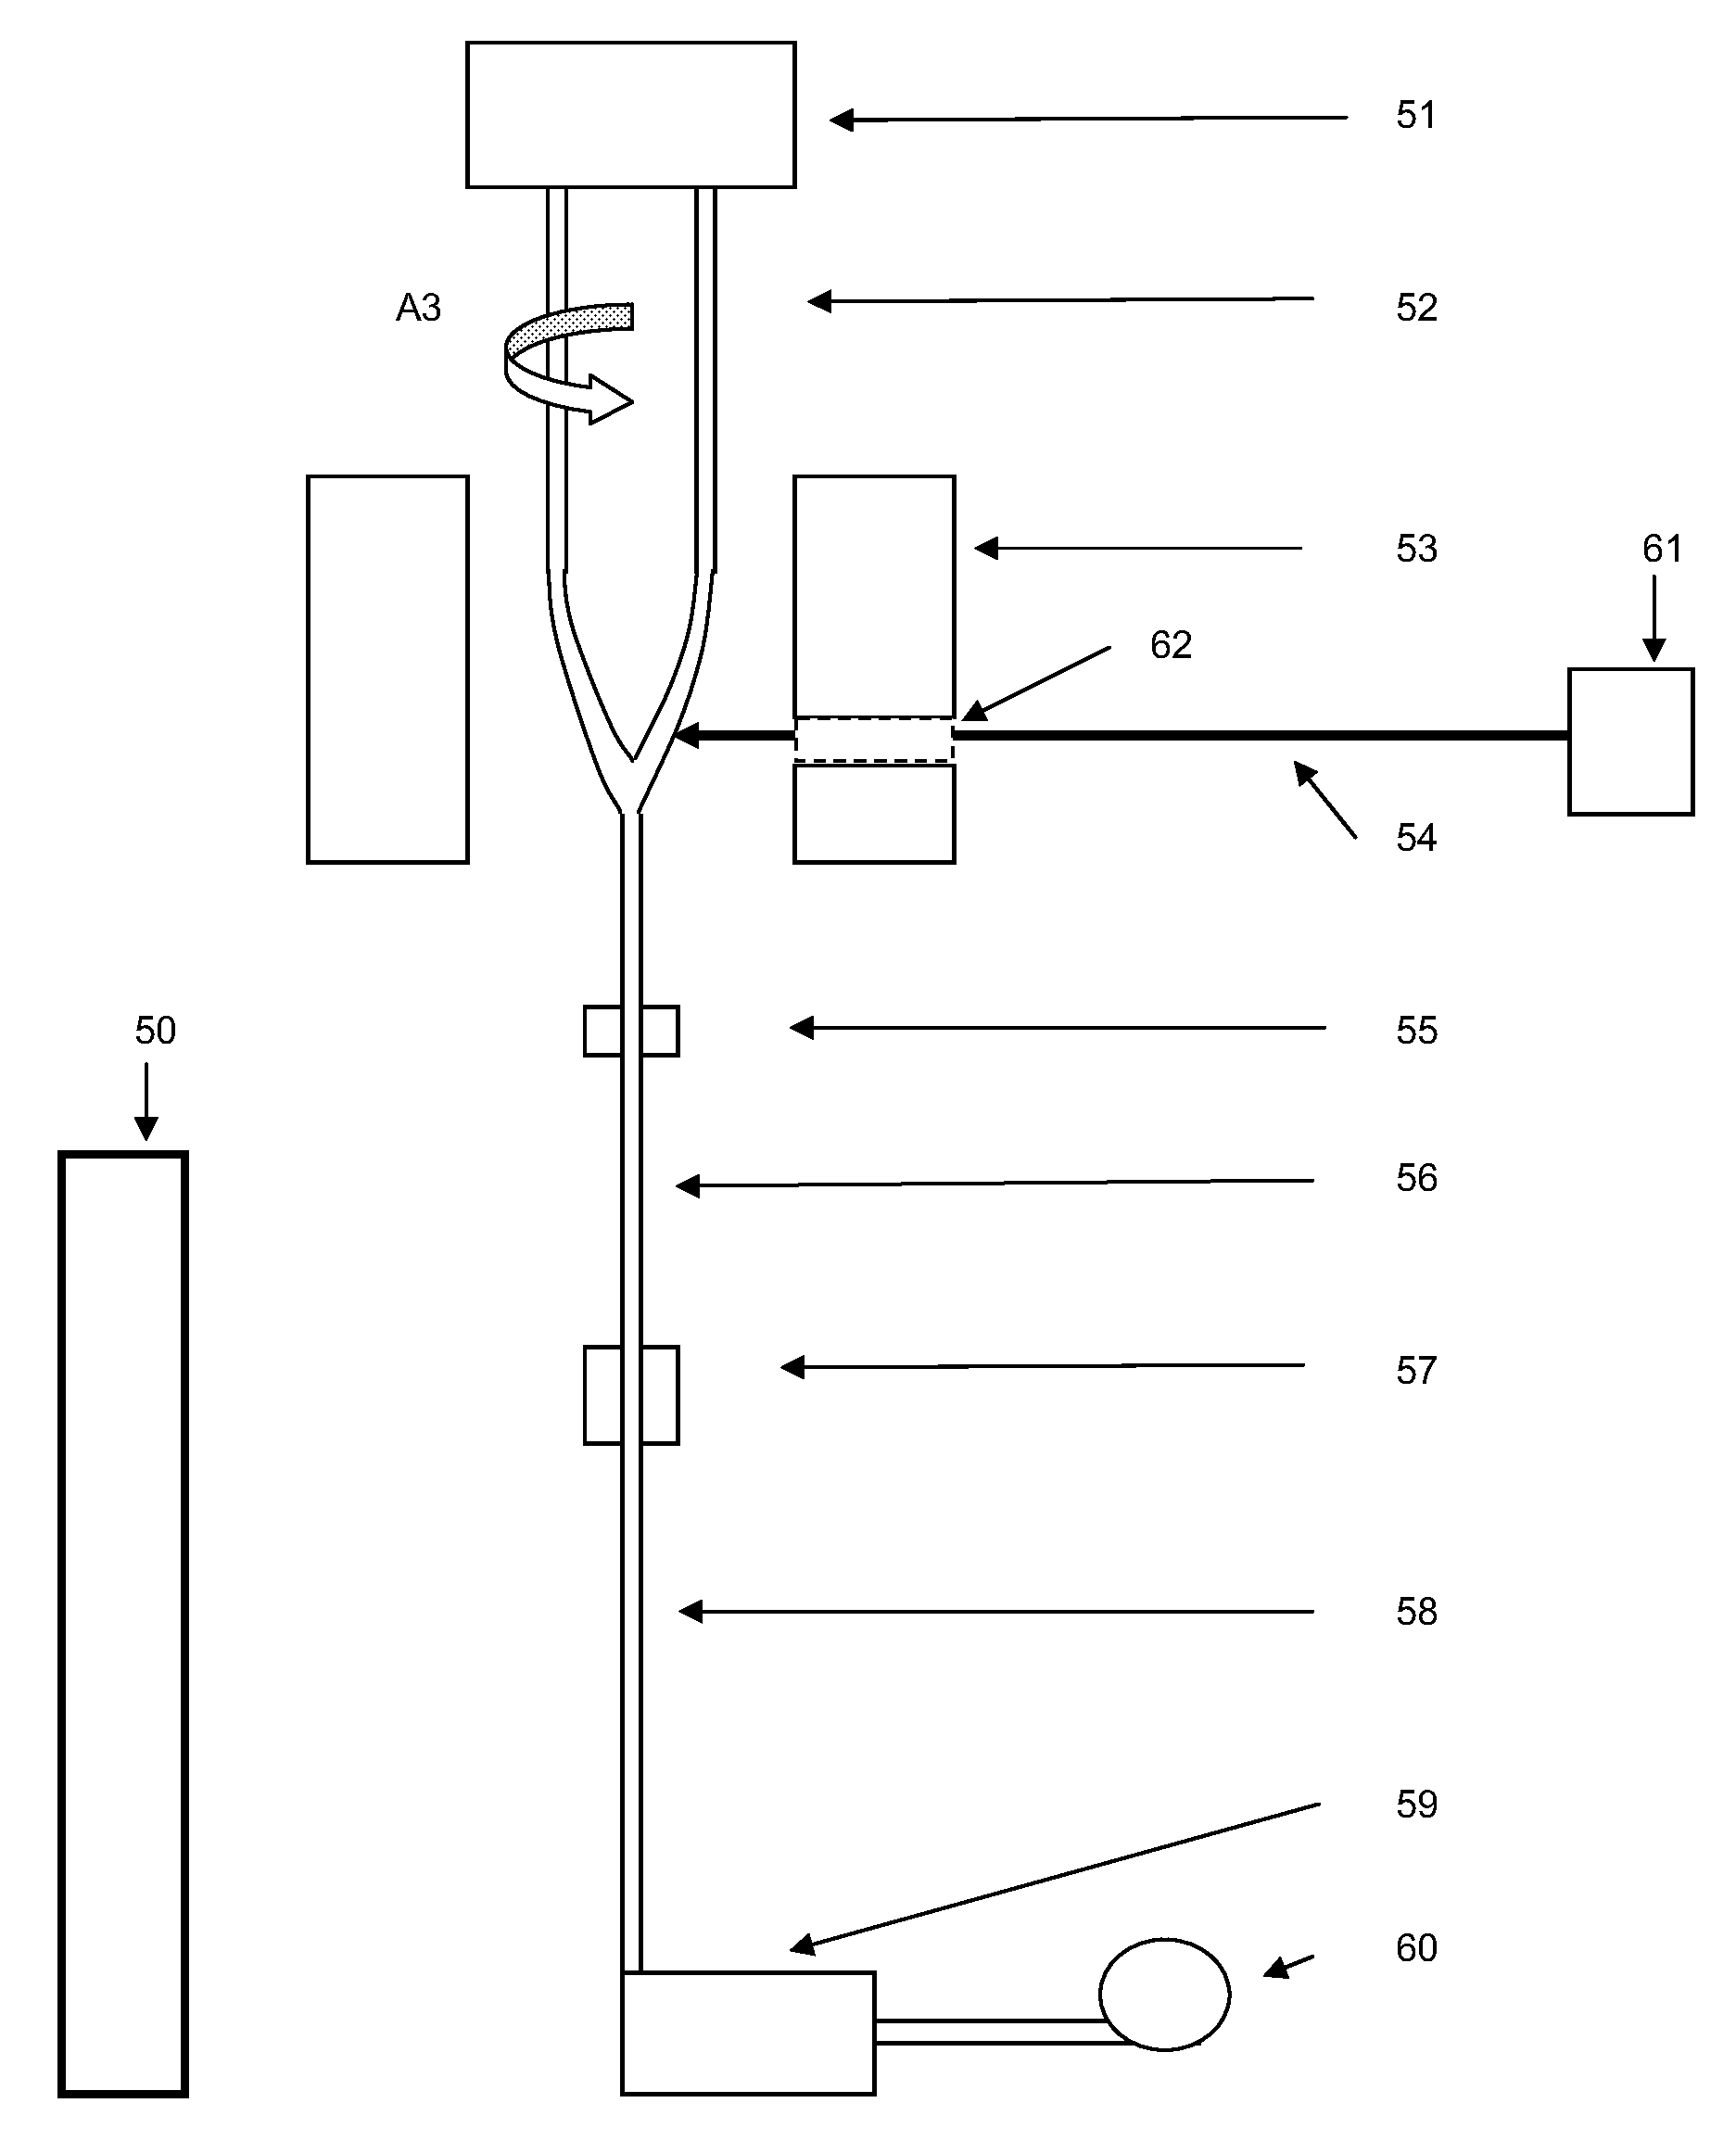 Process, apparatus, and material for making silicon germanium core fiber